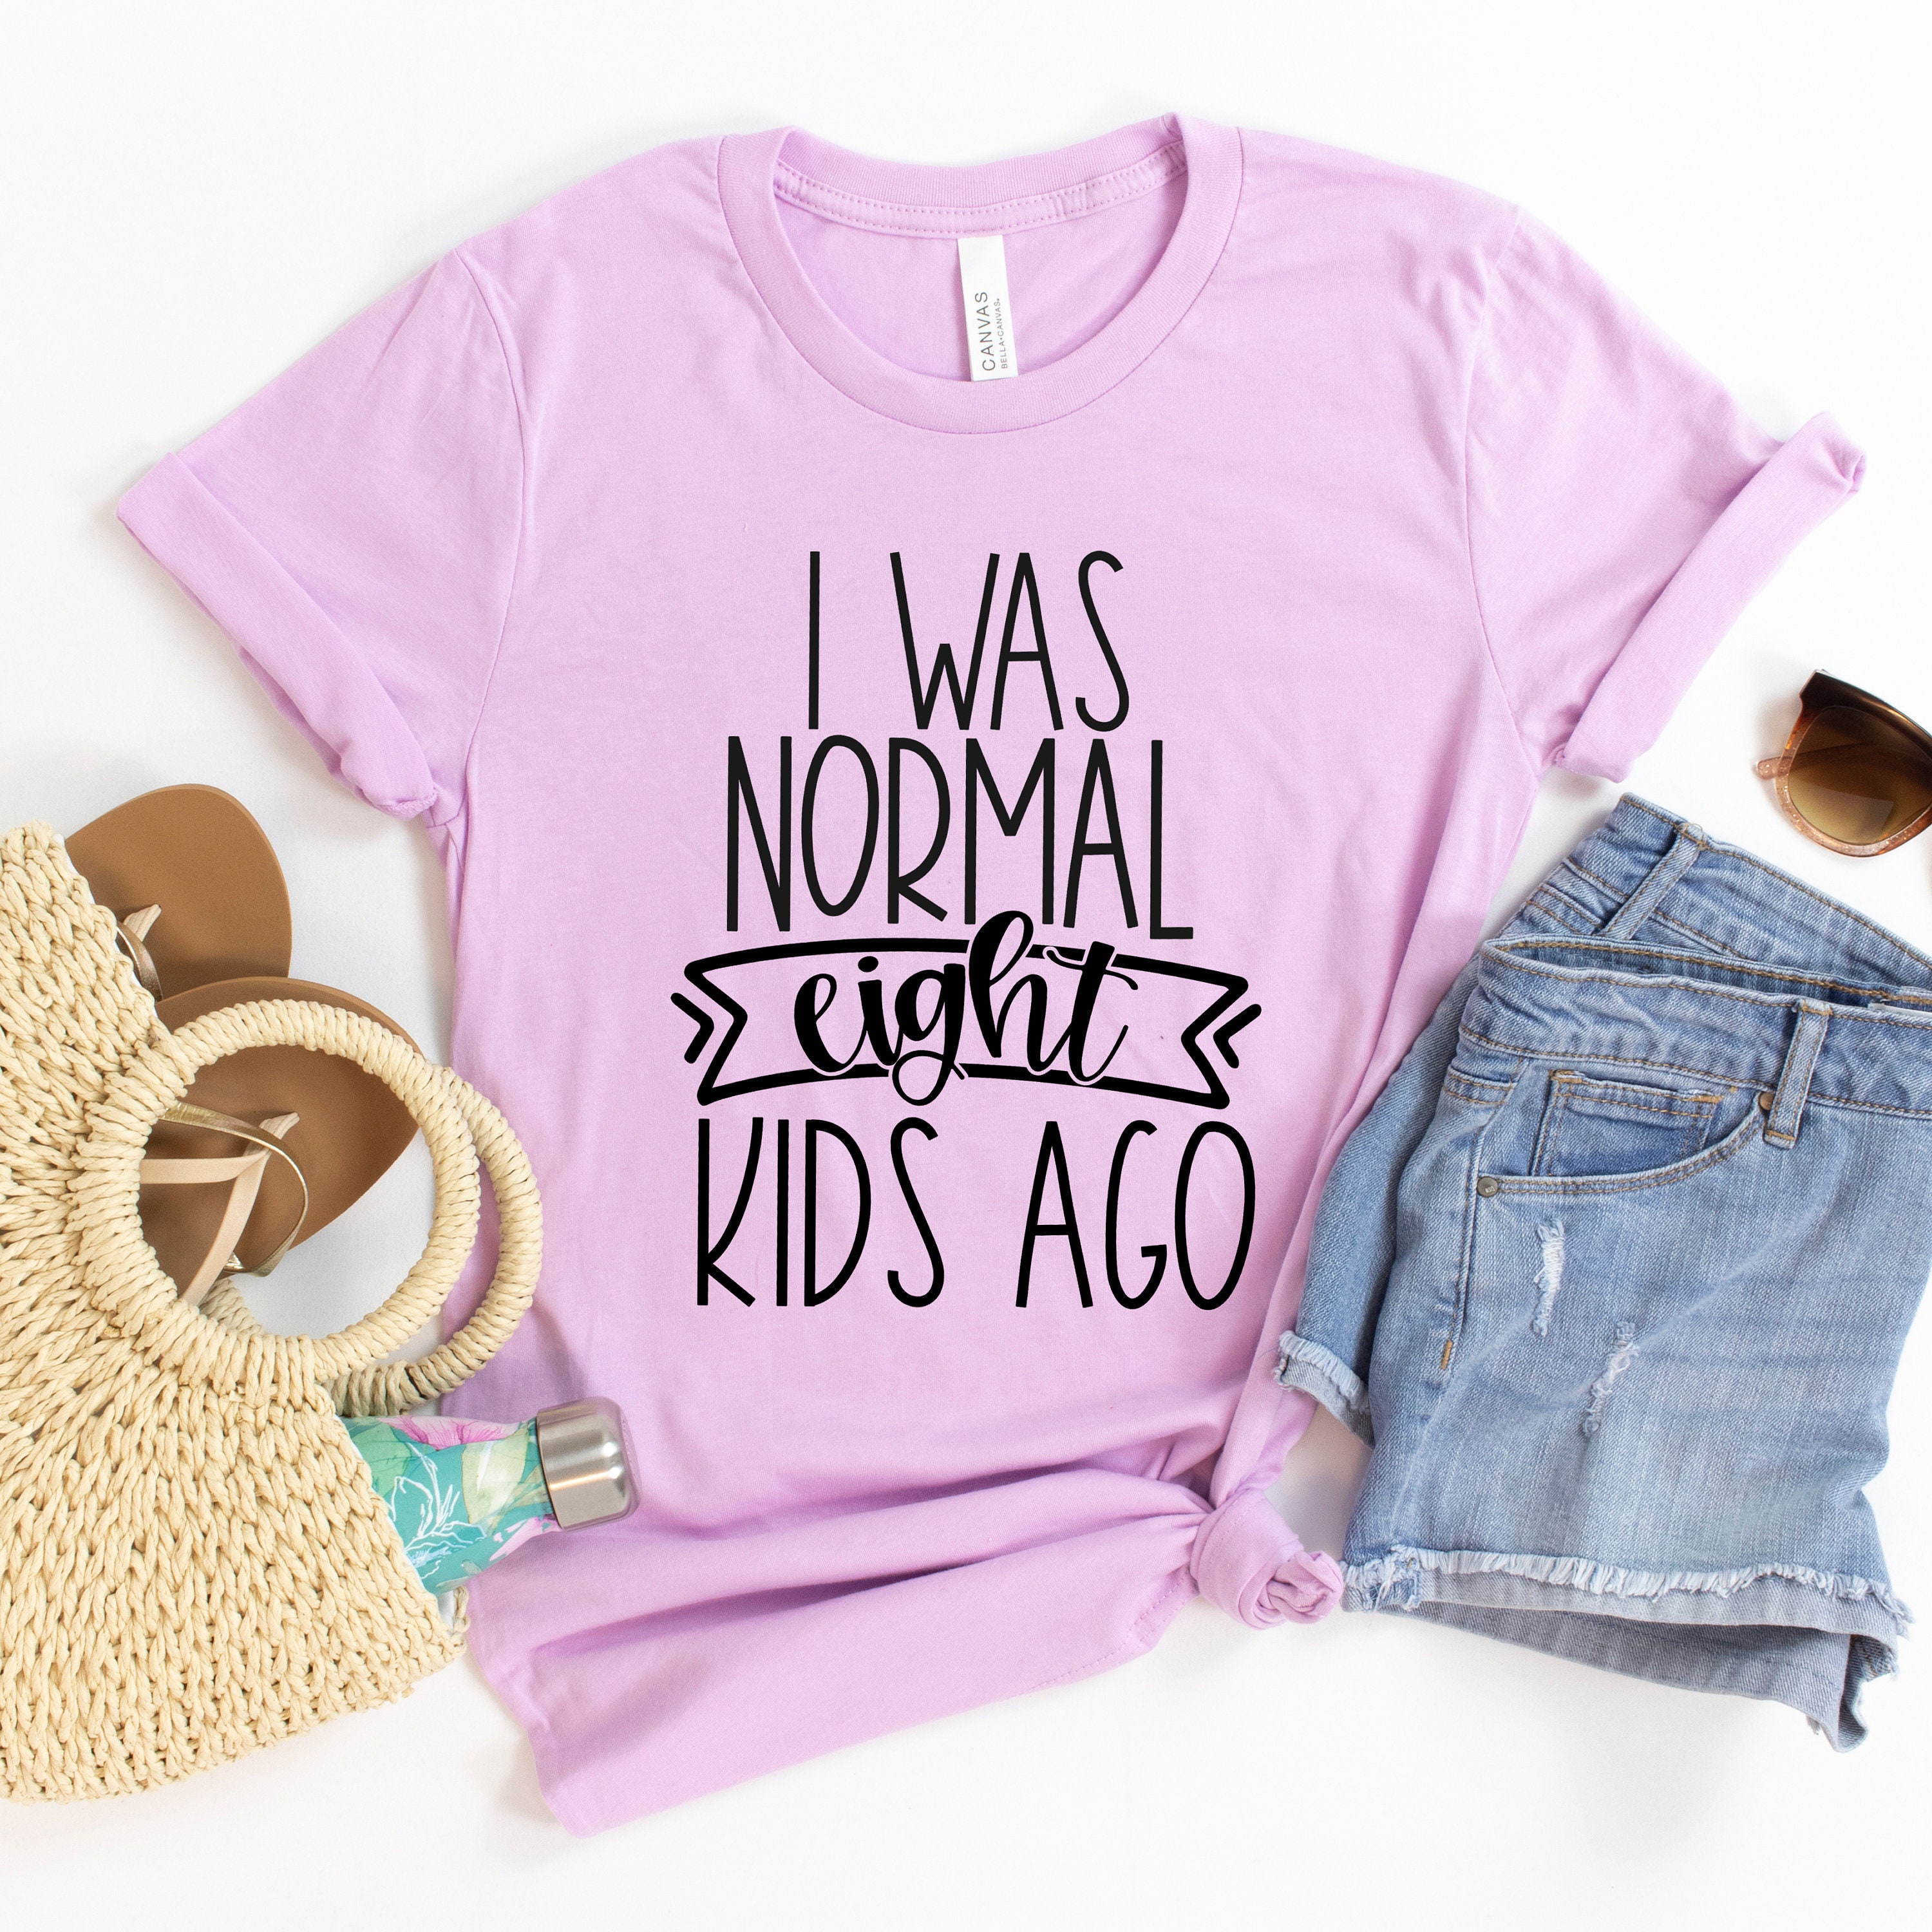 I Was Normal 8 Kids Ago, Eight Funny Mom Shirt, Cute Shirts, Life Tired Shirts